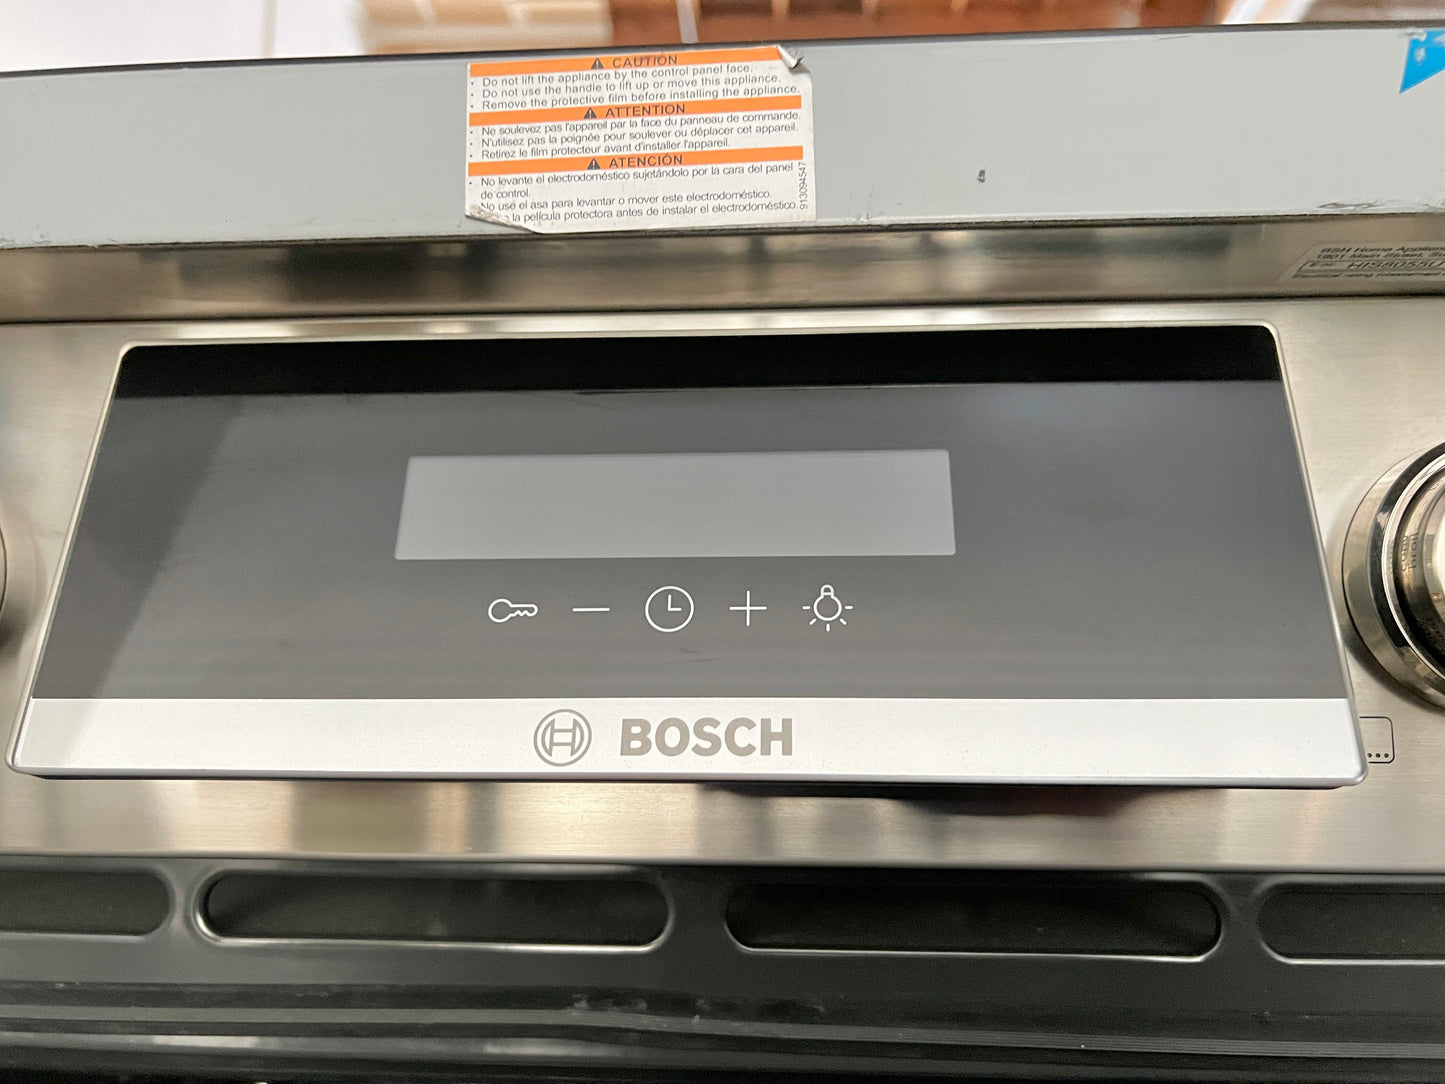 Bosch 800 Series  HIS8055U 30 Inch Freestanding Induction Range with 4 Elements, 10 Cooking Modes, QuietClose Door Hinges, Convection Oven, Sabbath Mode, and Digital Display , 369377